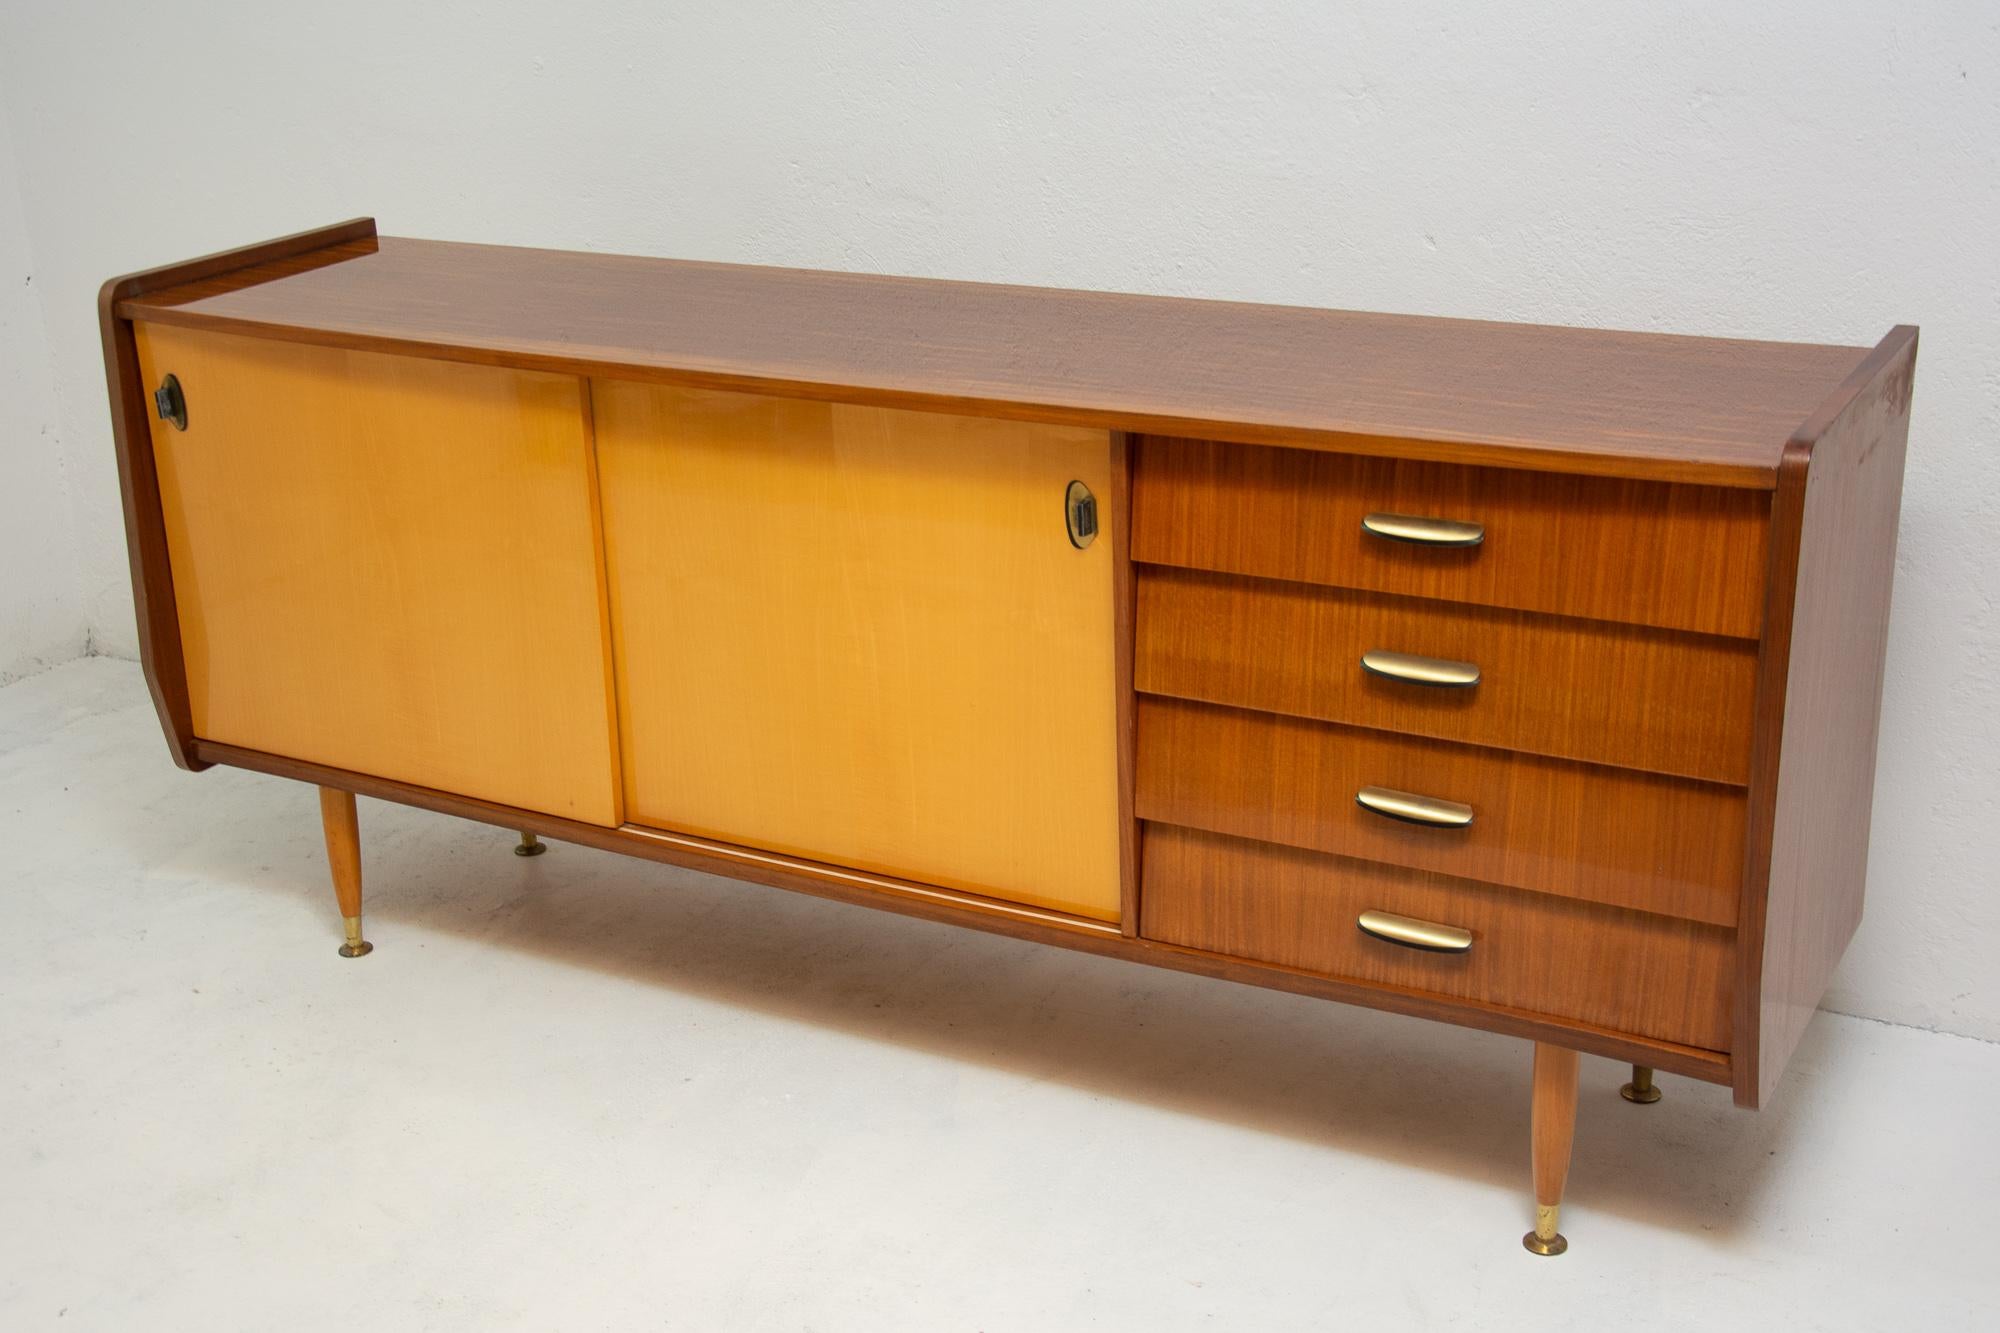 Italian Midcentury Mahogany Sideboard from the 1960s In Good Condition In Prague 8, CZ